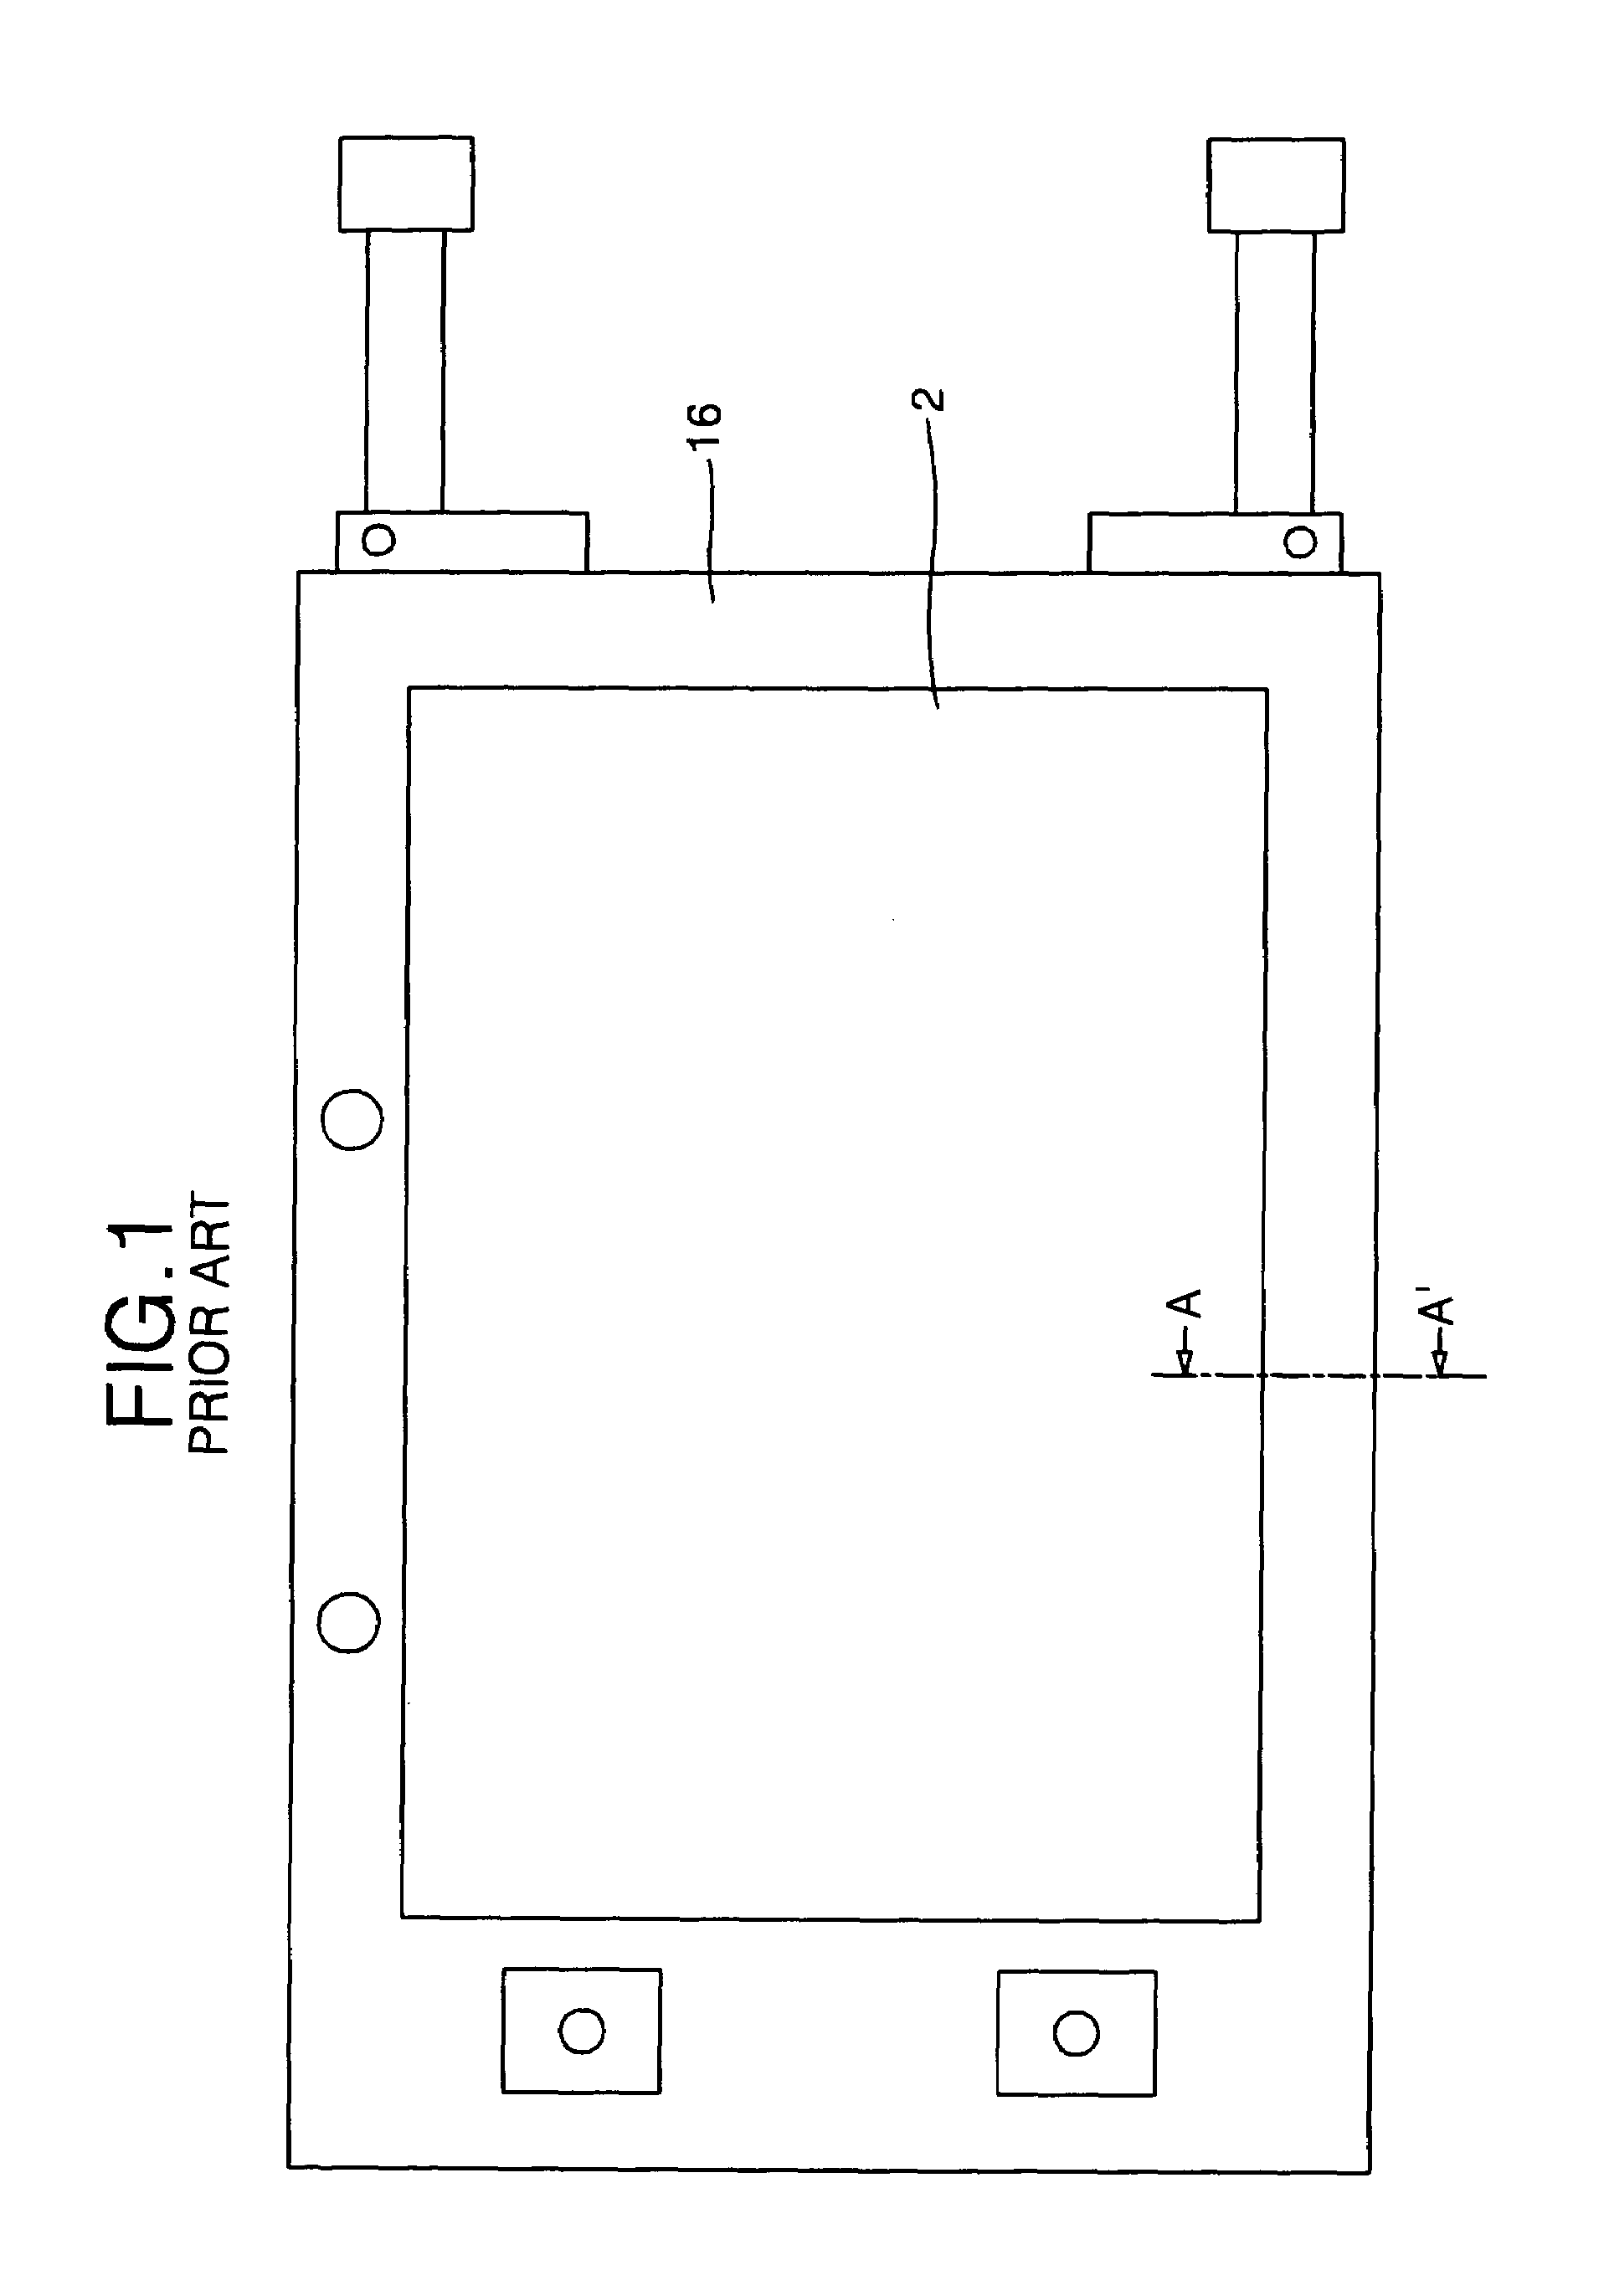 Liquid crystal display device comprising a pad in contact with a light guide and maintaining a distance between a panel guide and a backlight assembly